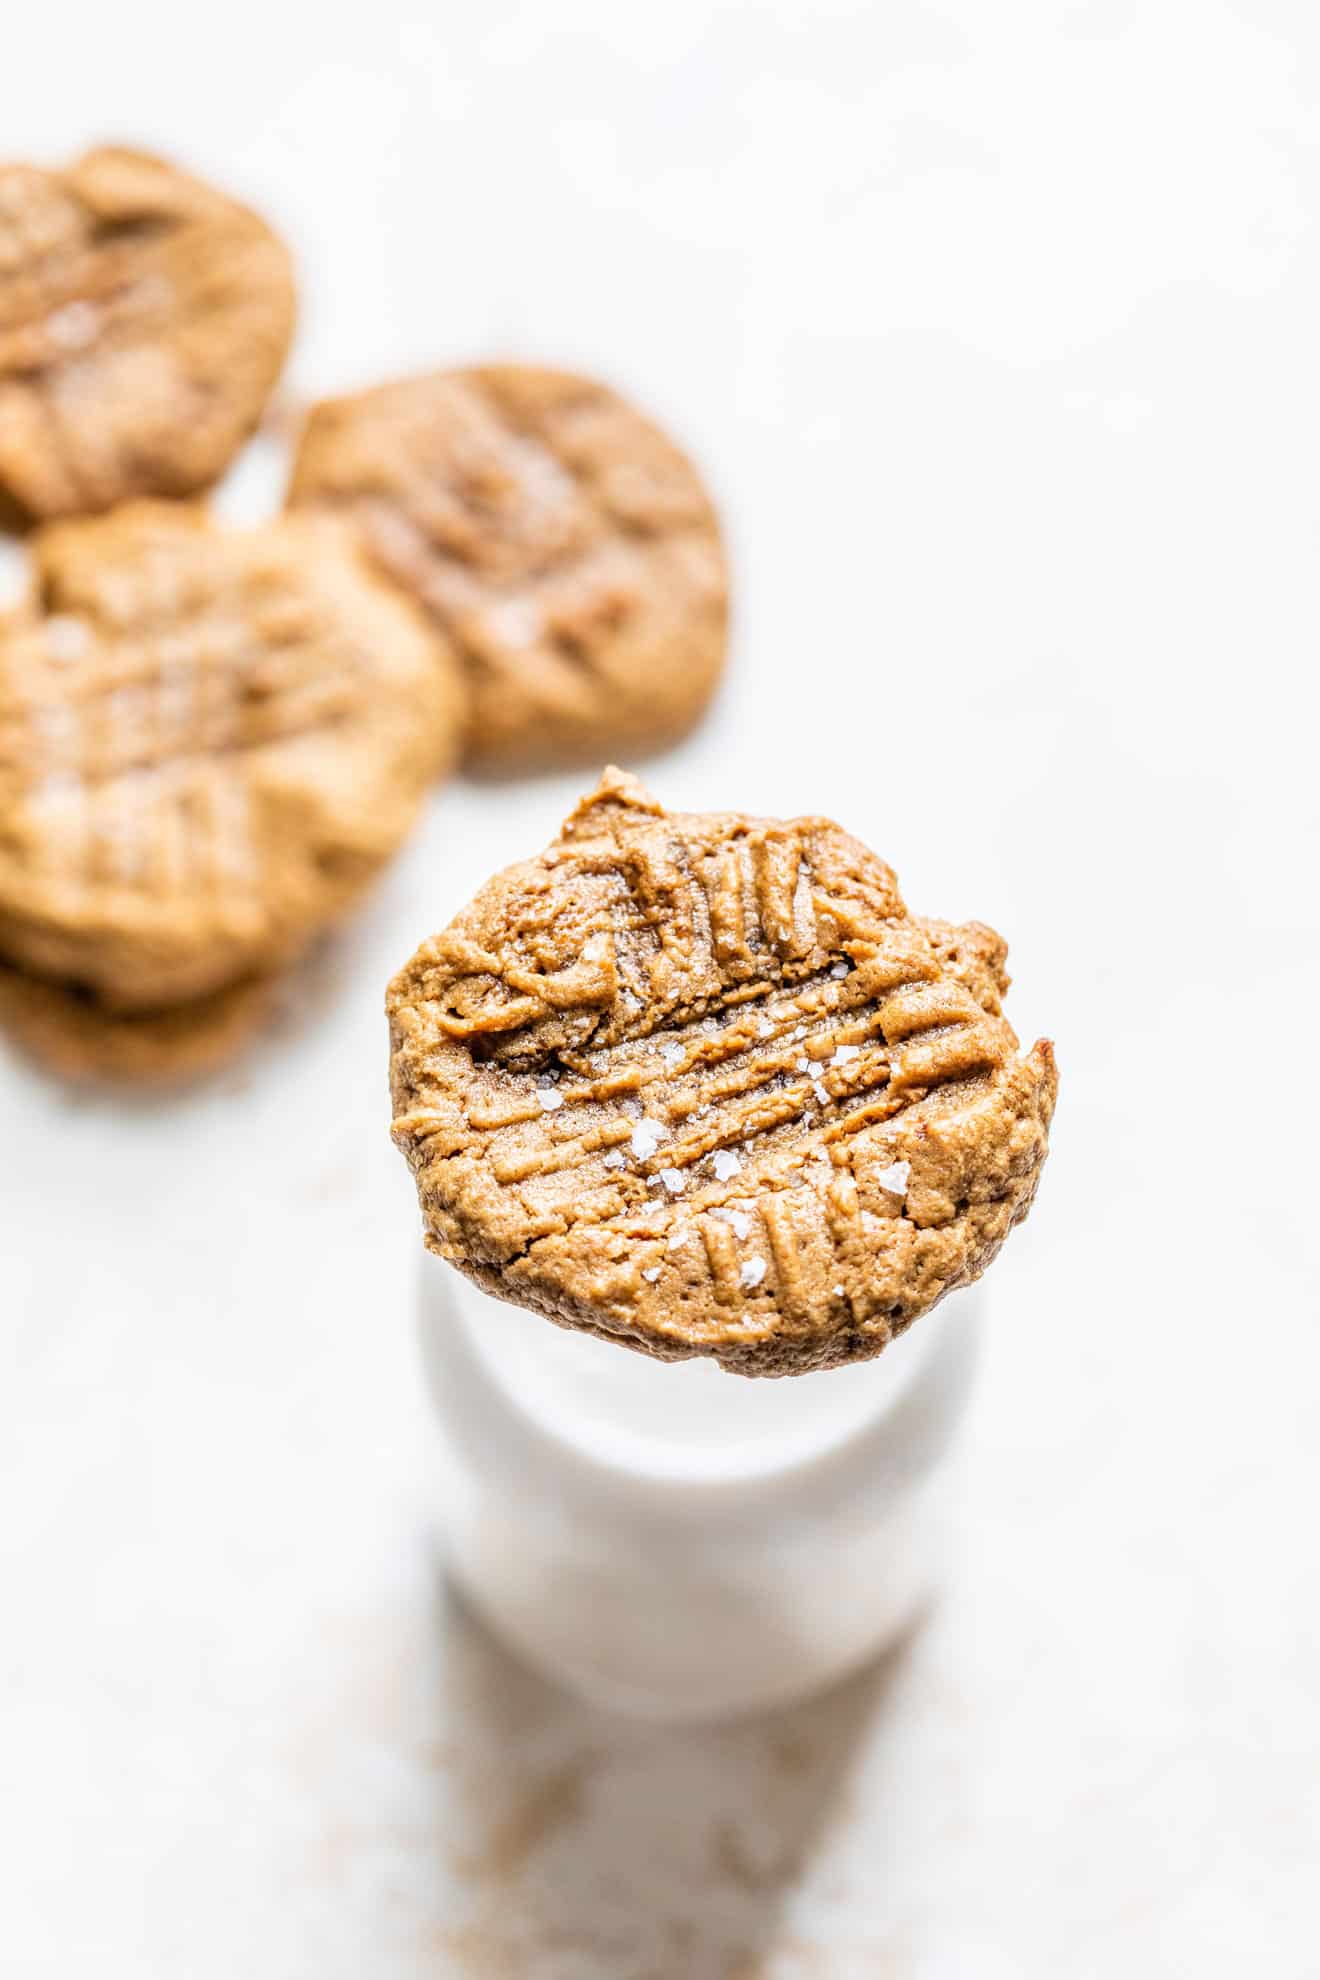 This is an overhead image of a peanut butter cookie sitting on top of a glass of milk. The milk sits on a white counter with more peanut butter cookies blurred in the background. The cookie has fork imprints and salt sprinkled on top. 